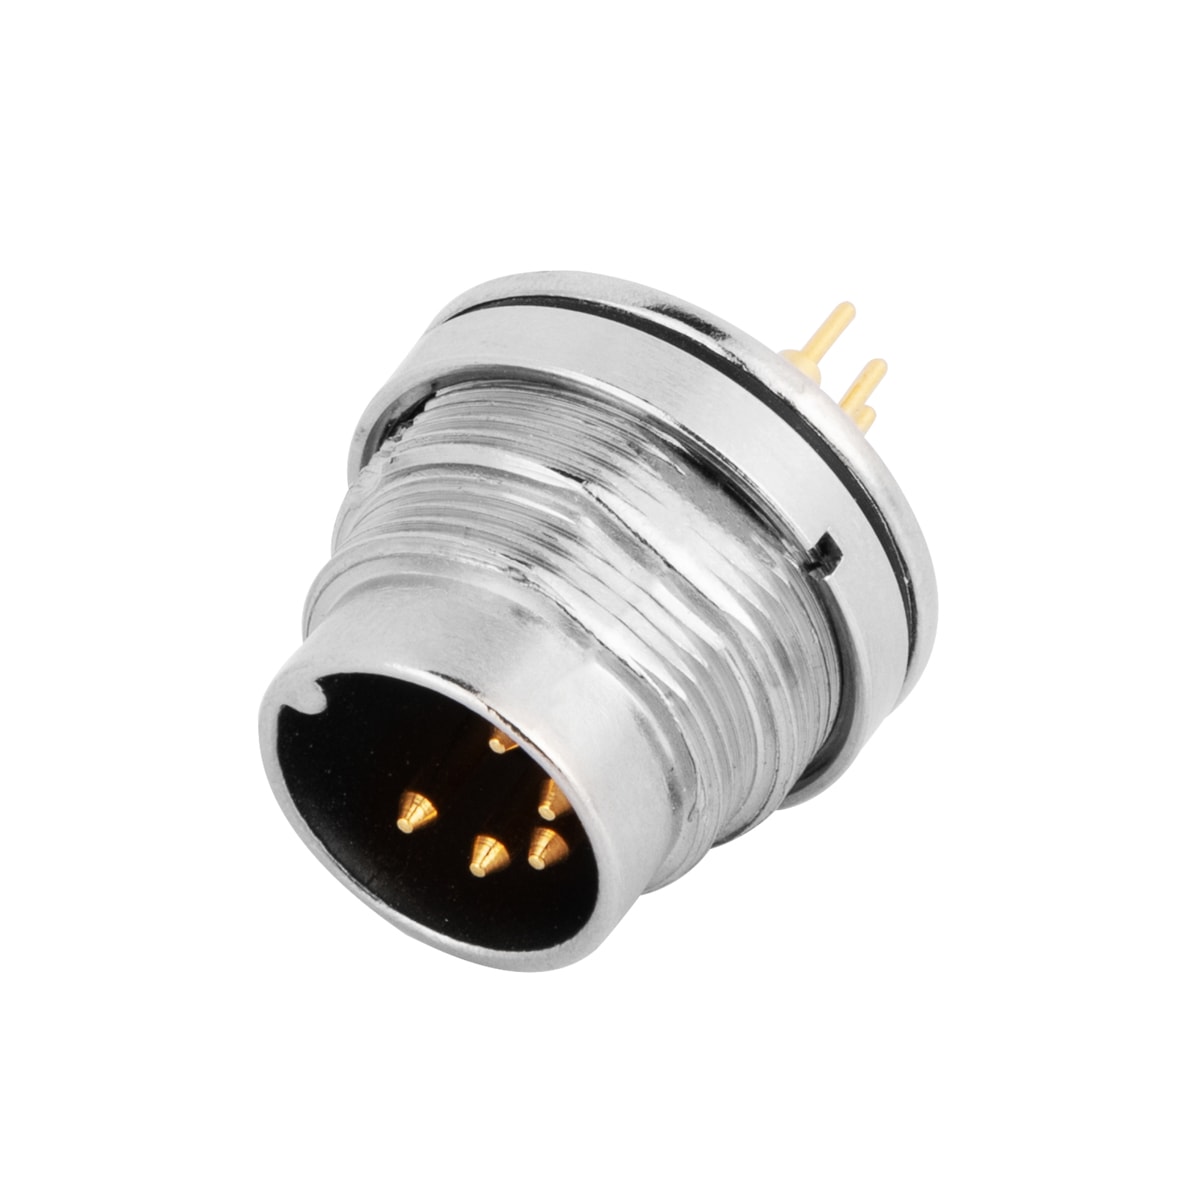 M1M16 panel receptacle, rear mount, male, contacts:5, PCB dip-solderconnection, straight, IP67, UL certified